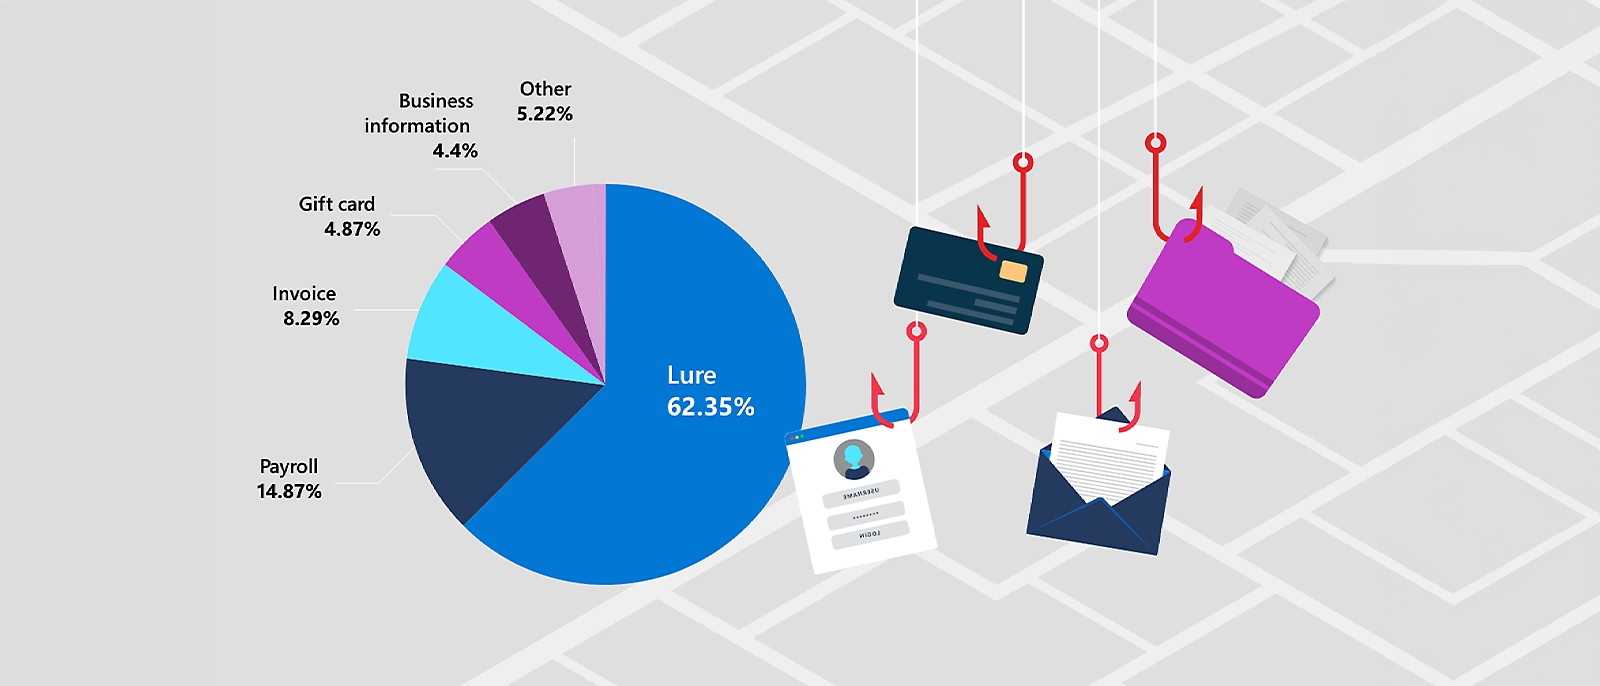 Pie chart showing the percentage breakdown of different types of phishing emails used in Business Email Compromise attacks. Lure is the most common type at 62.35%, followed by Payroll (14.87%), Invoice (8.29%), Gift Card (4.87%), Business Information (4.4%), and Other (5.22%).